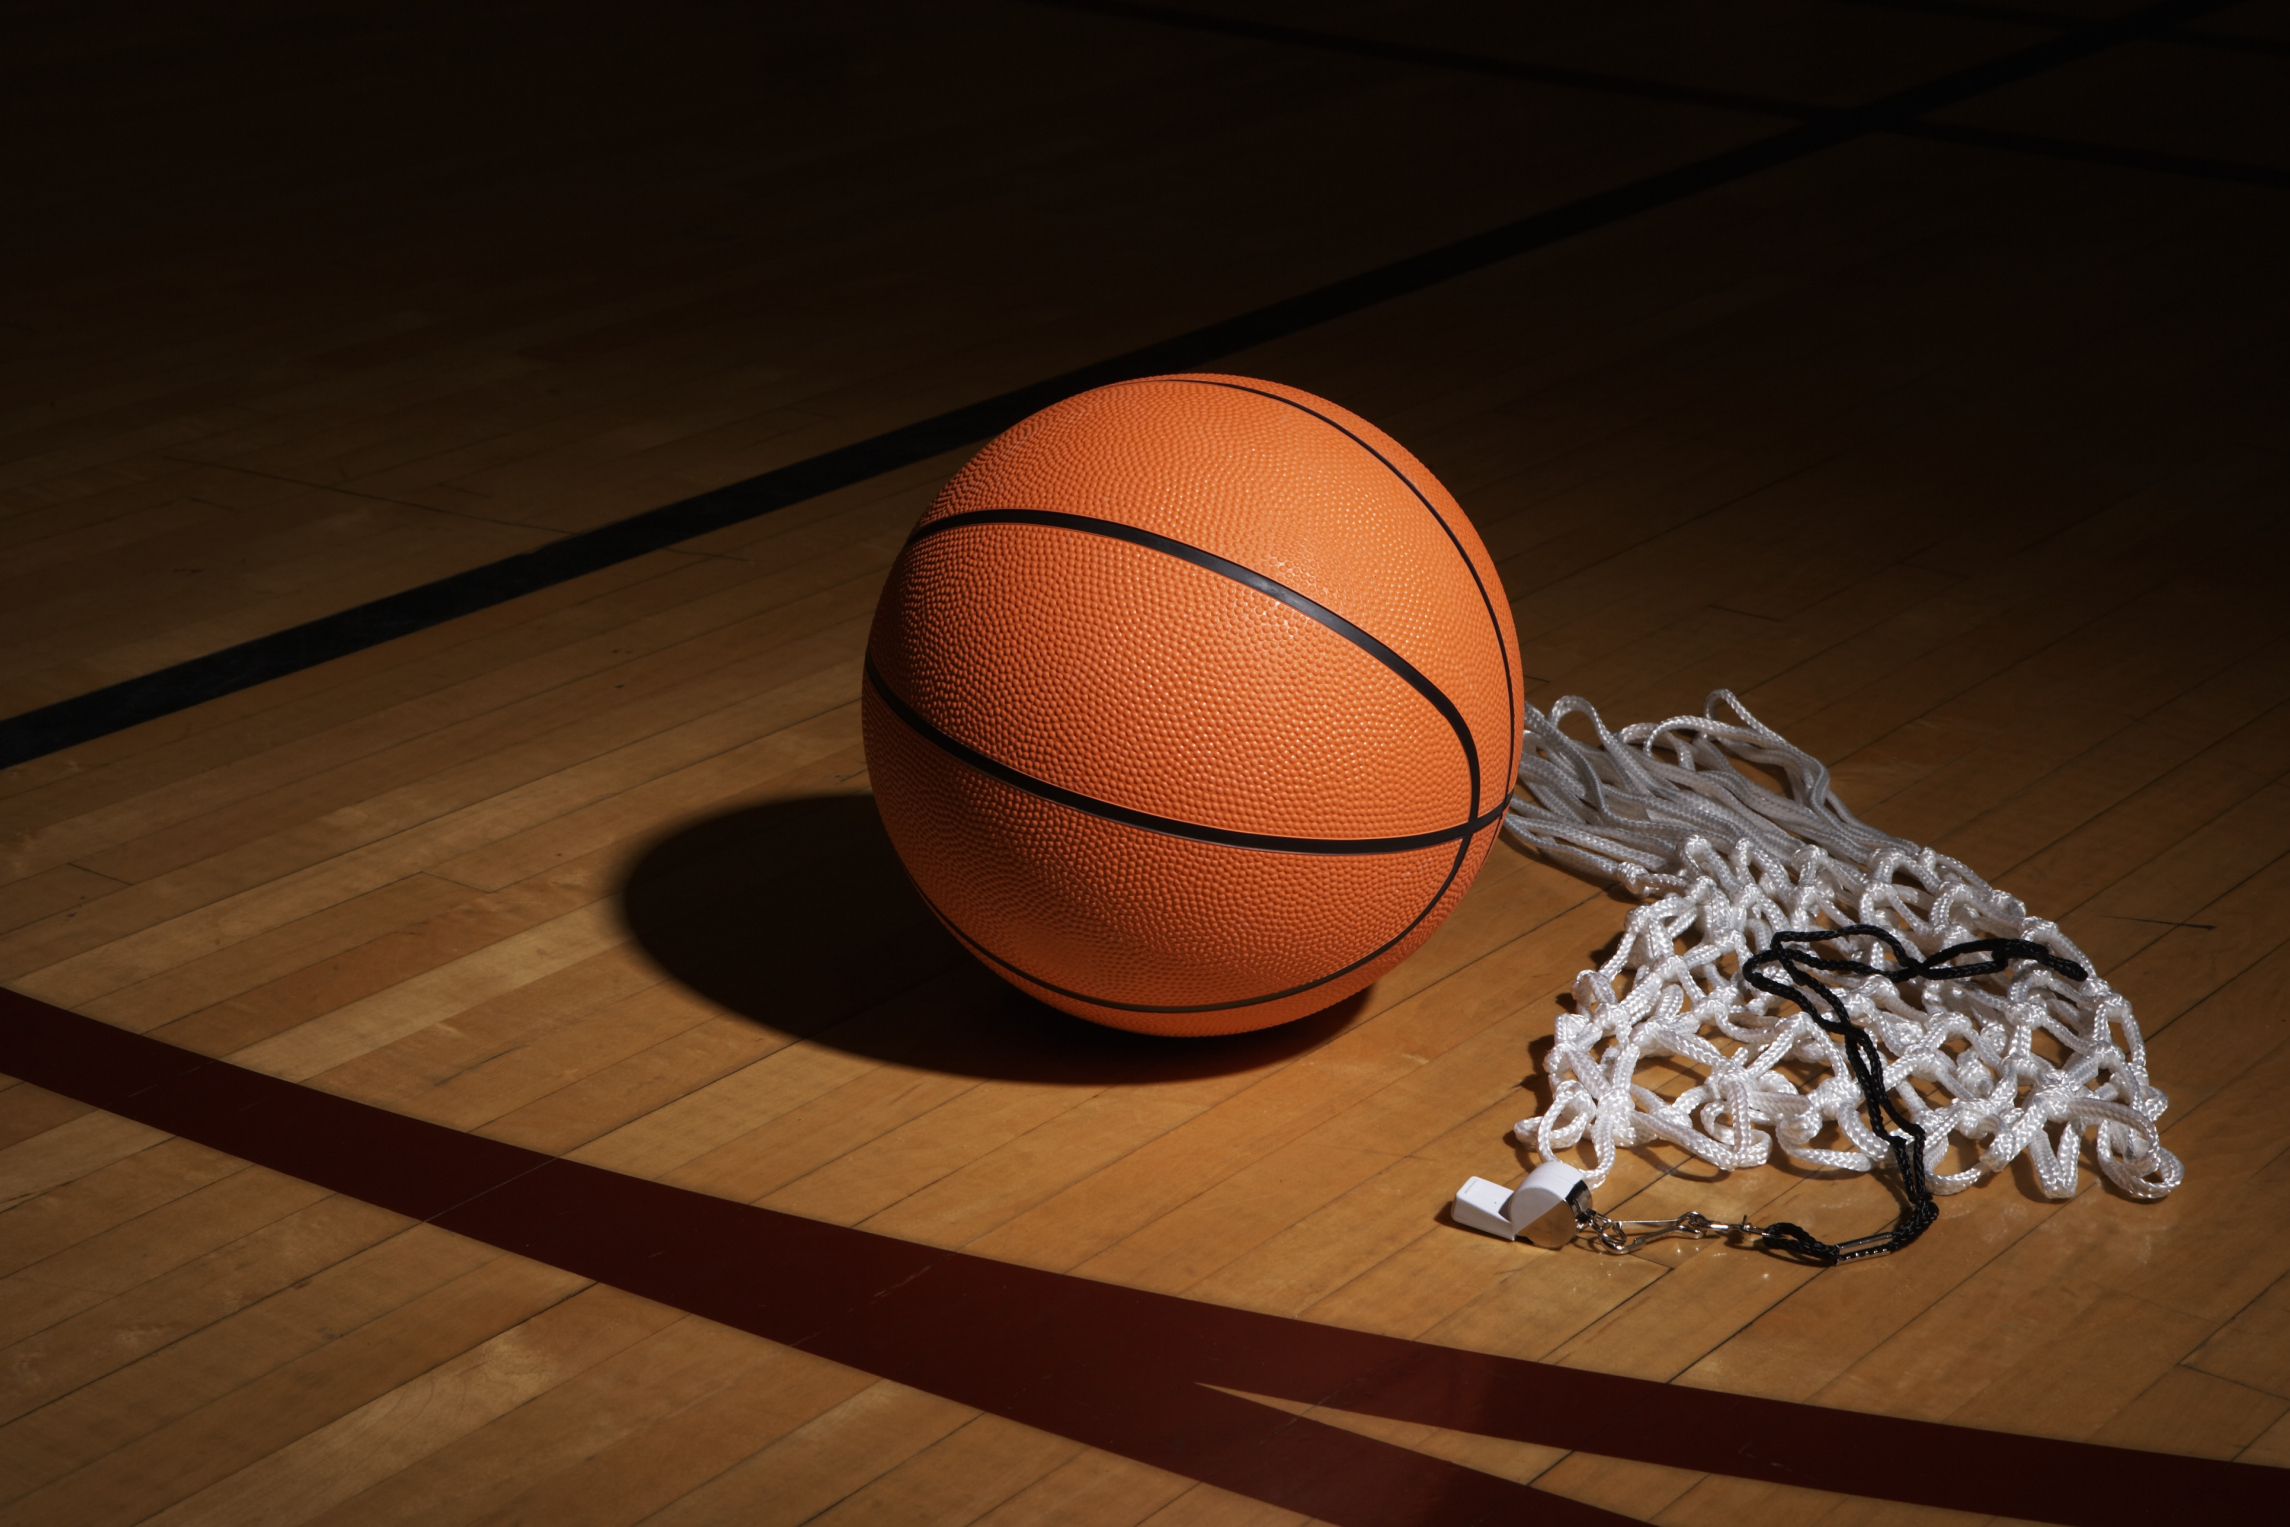 153727 download wallpaper basketball, sports, grid, whistle screensavers and pictures for free